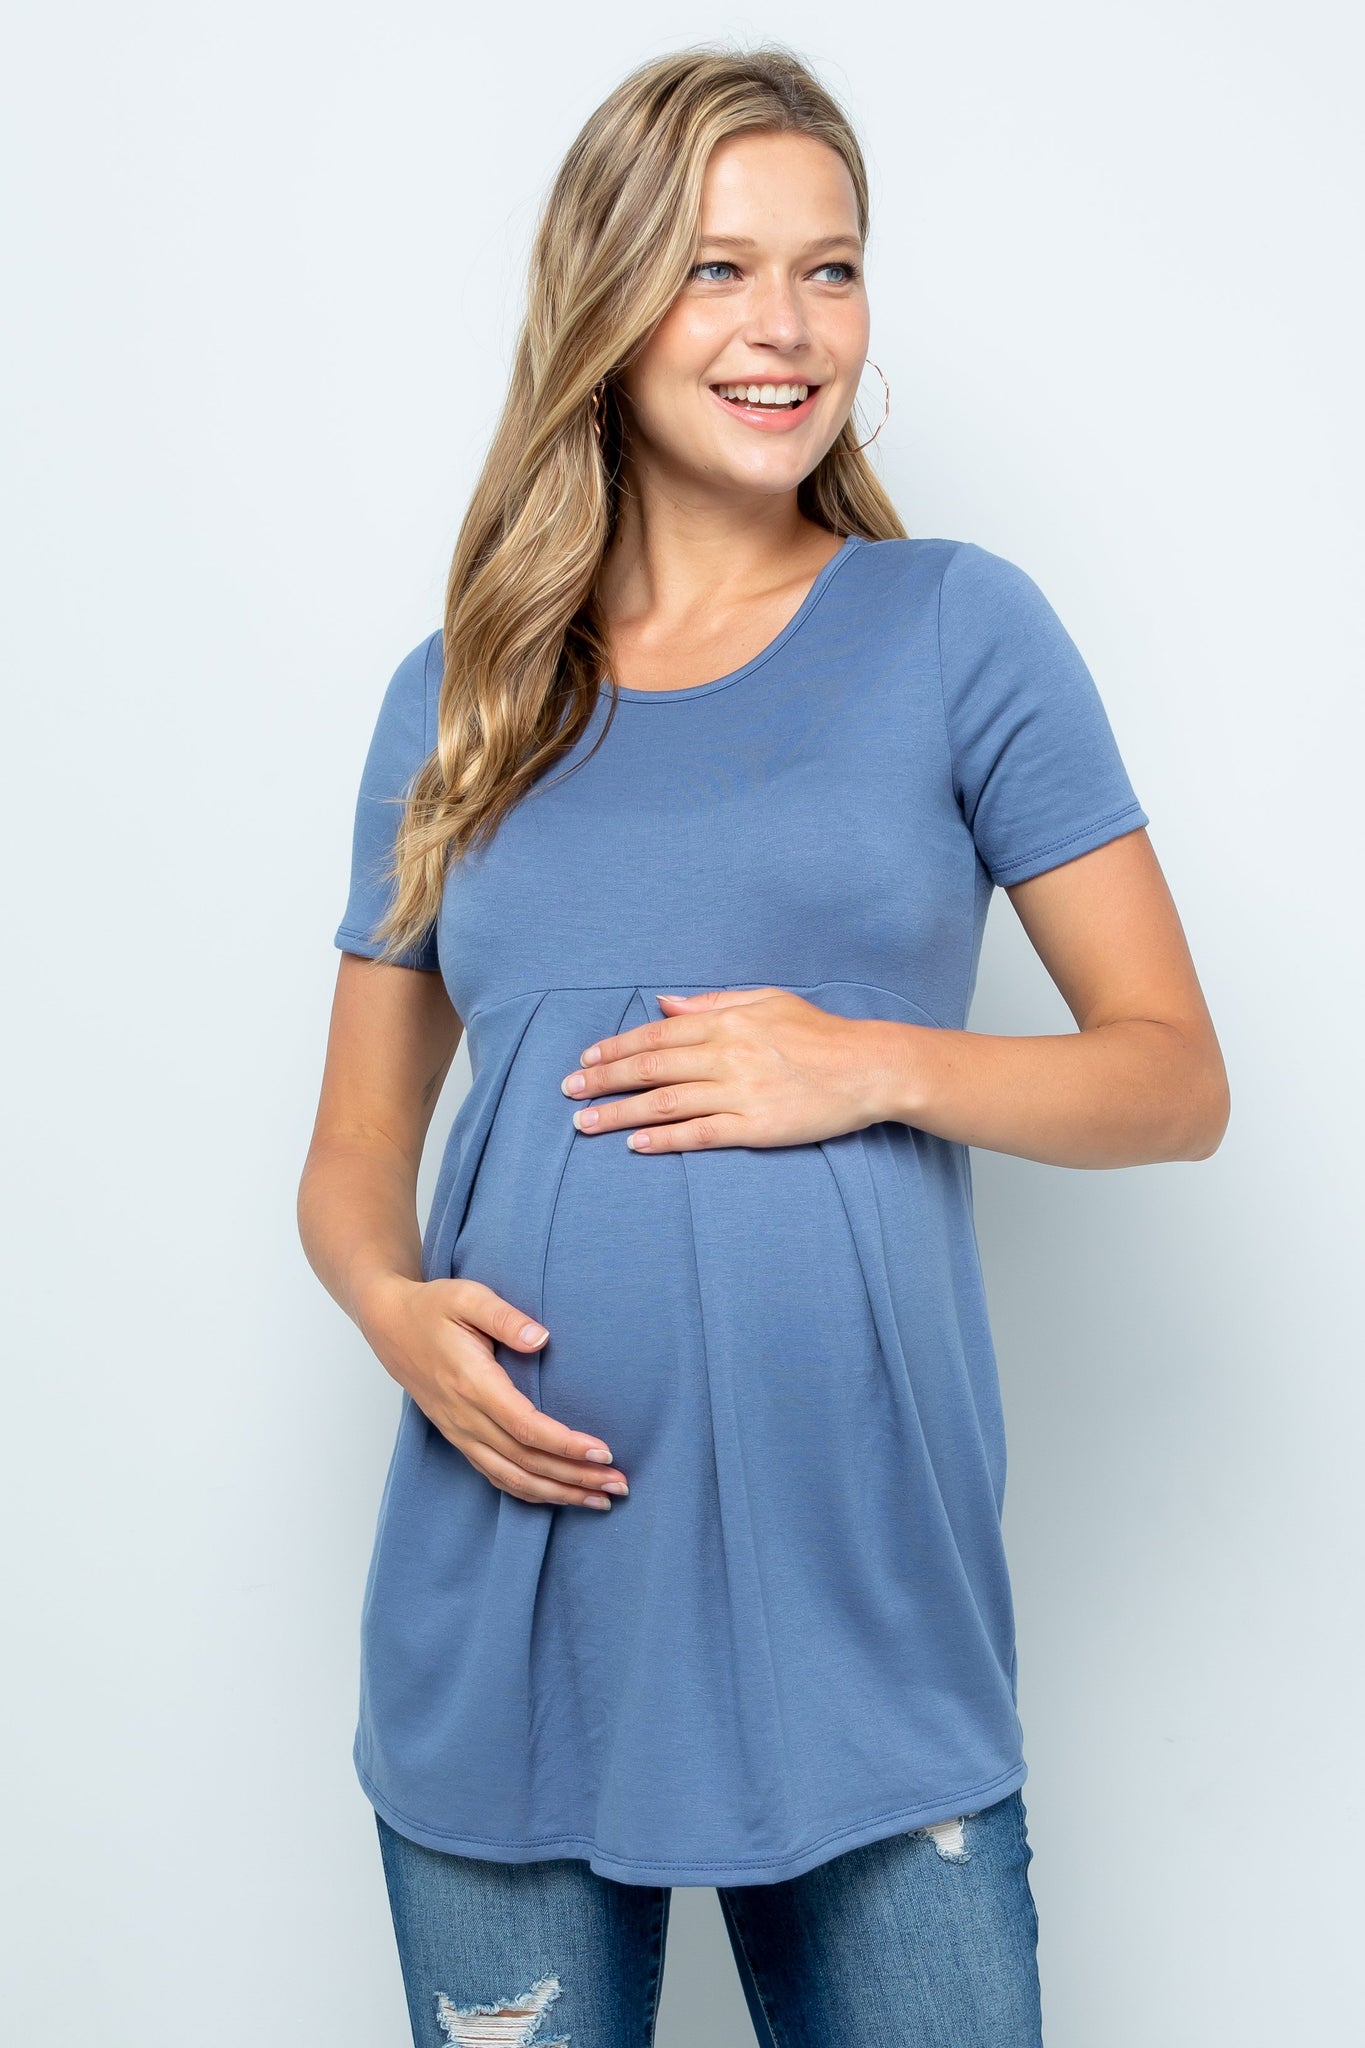 maternity pregnancy baby shower short sleeve round neck crewneck pleated top shirt blouse